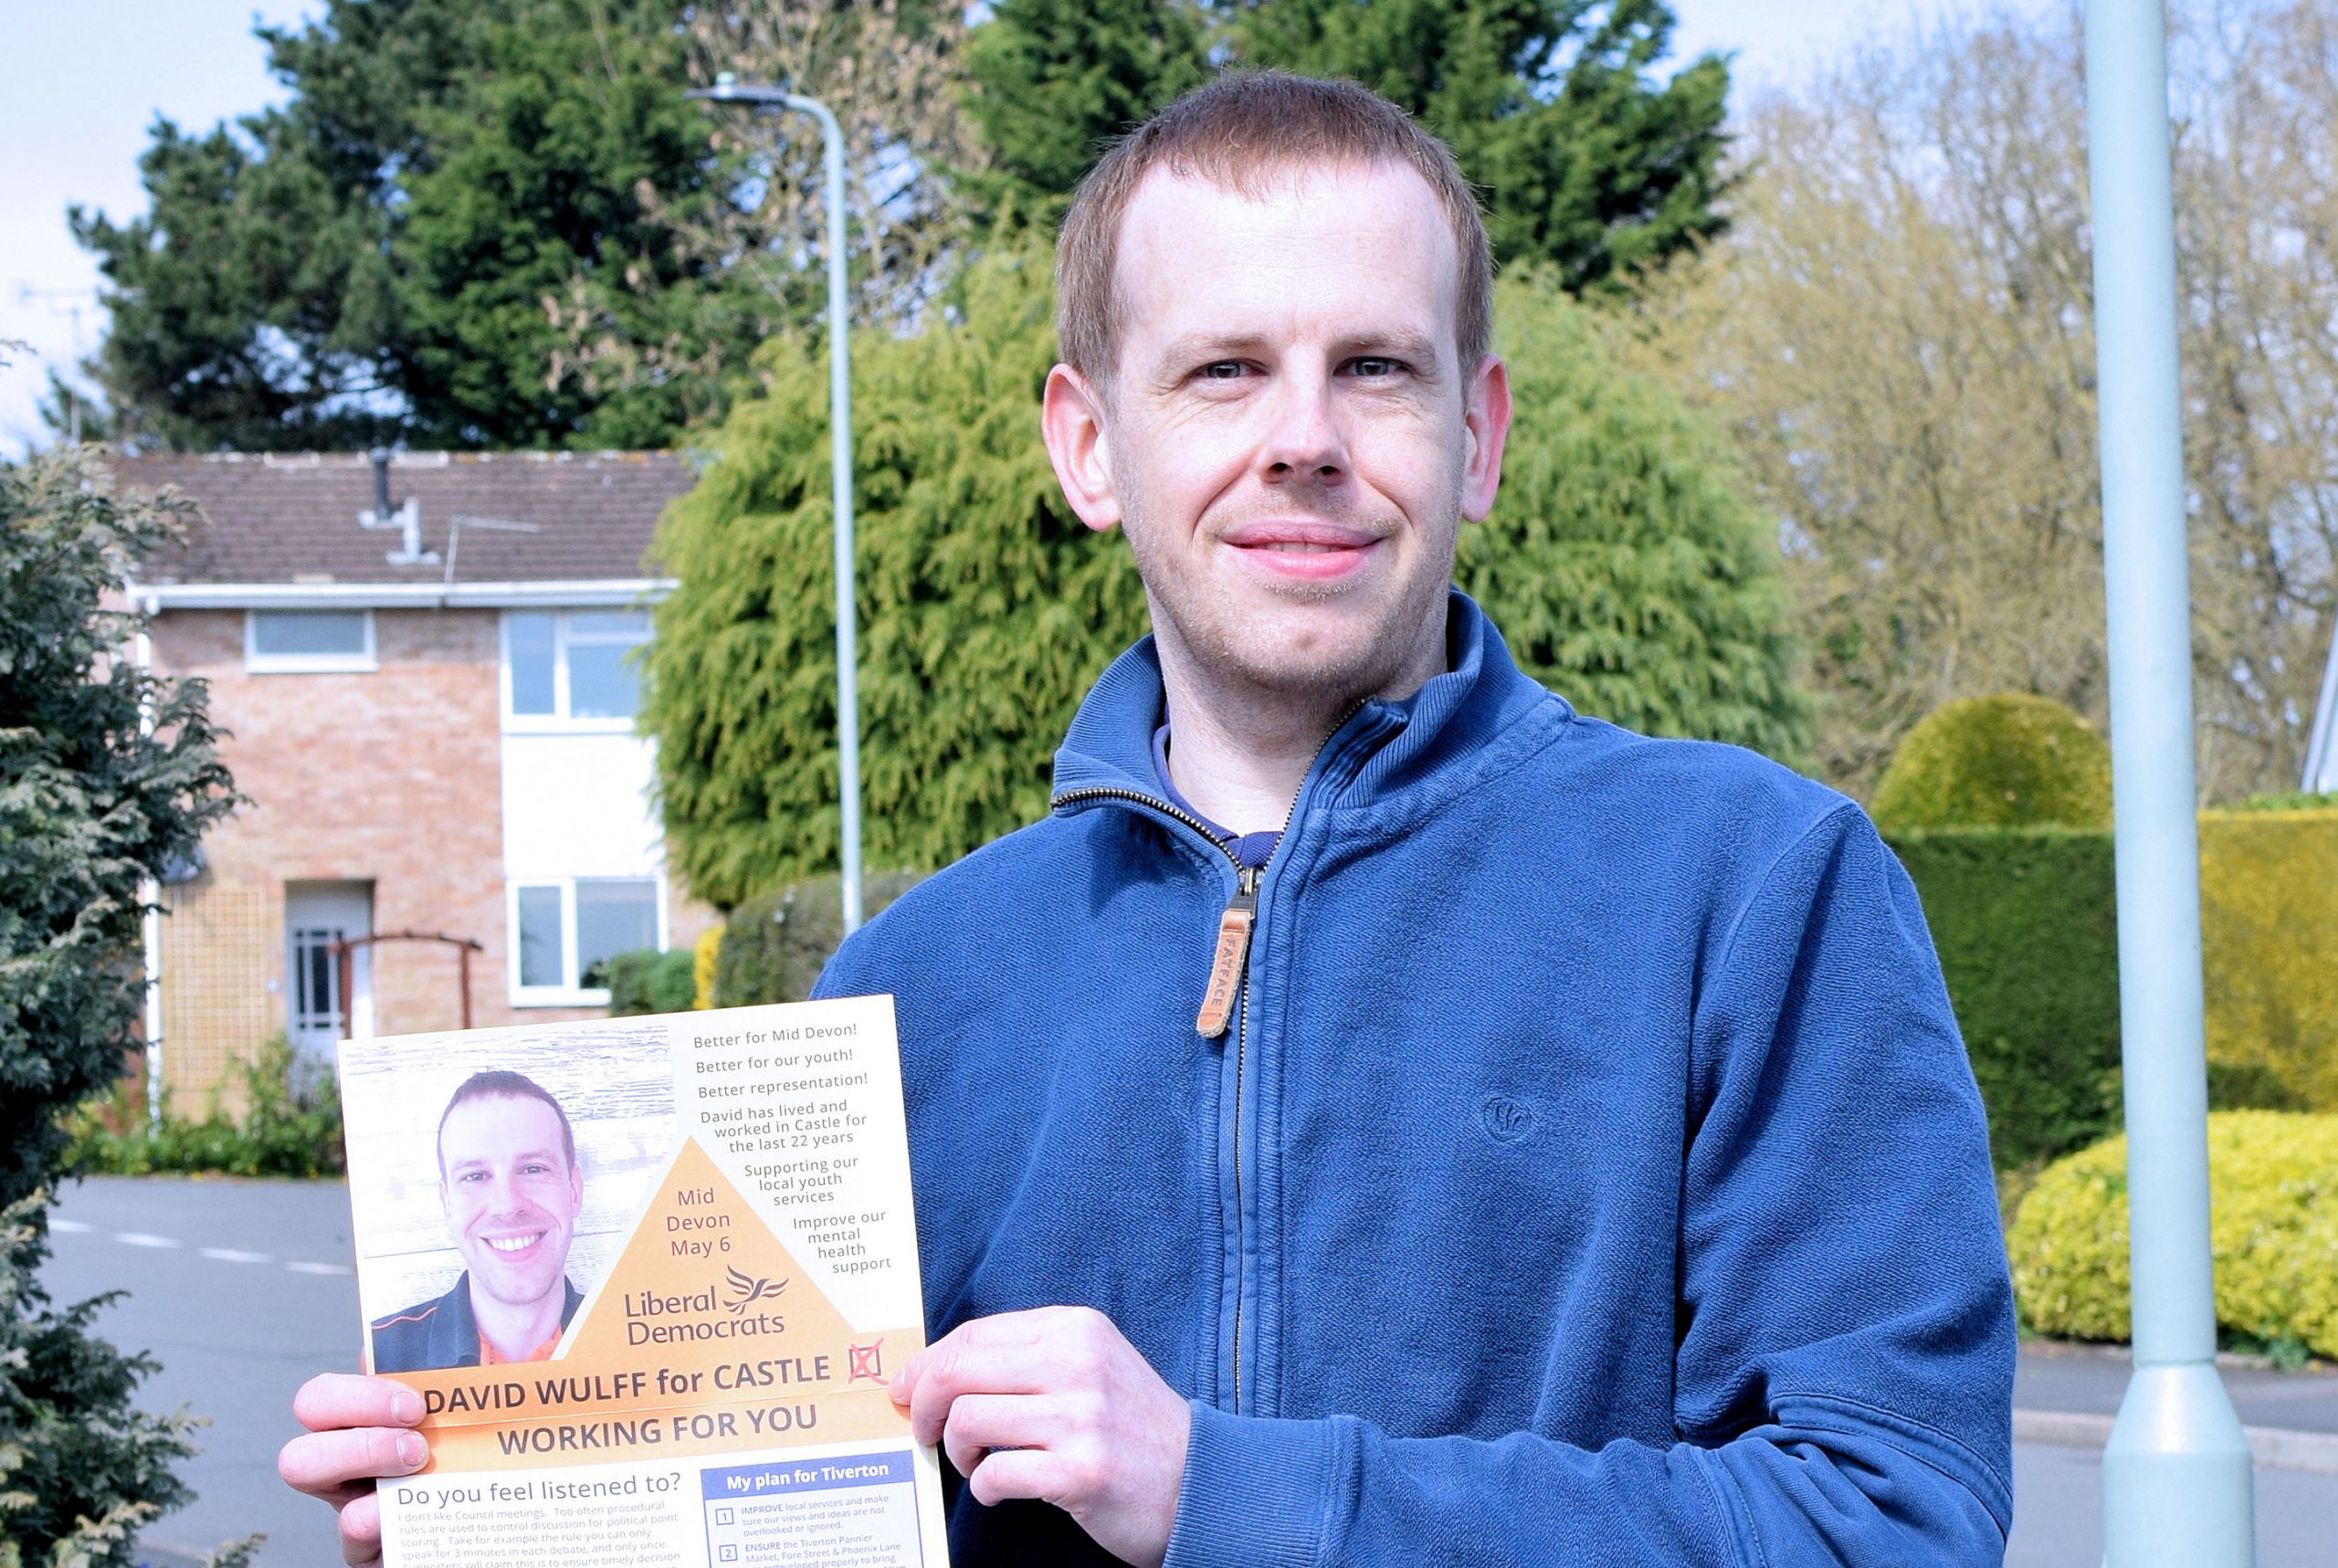 David Wulff with leaflet